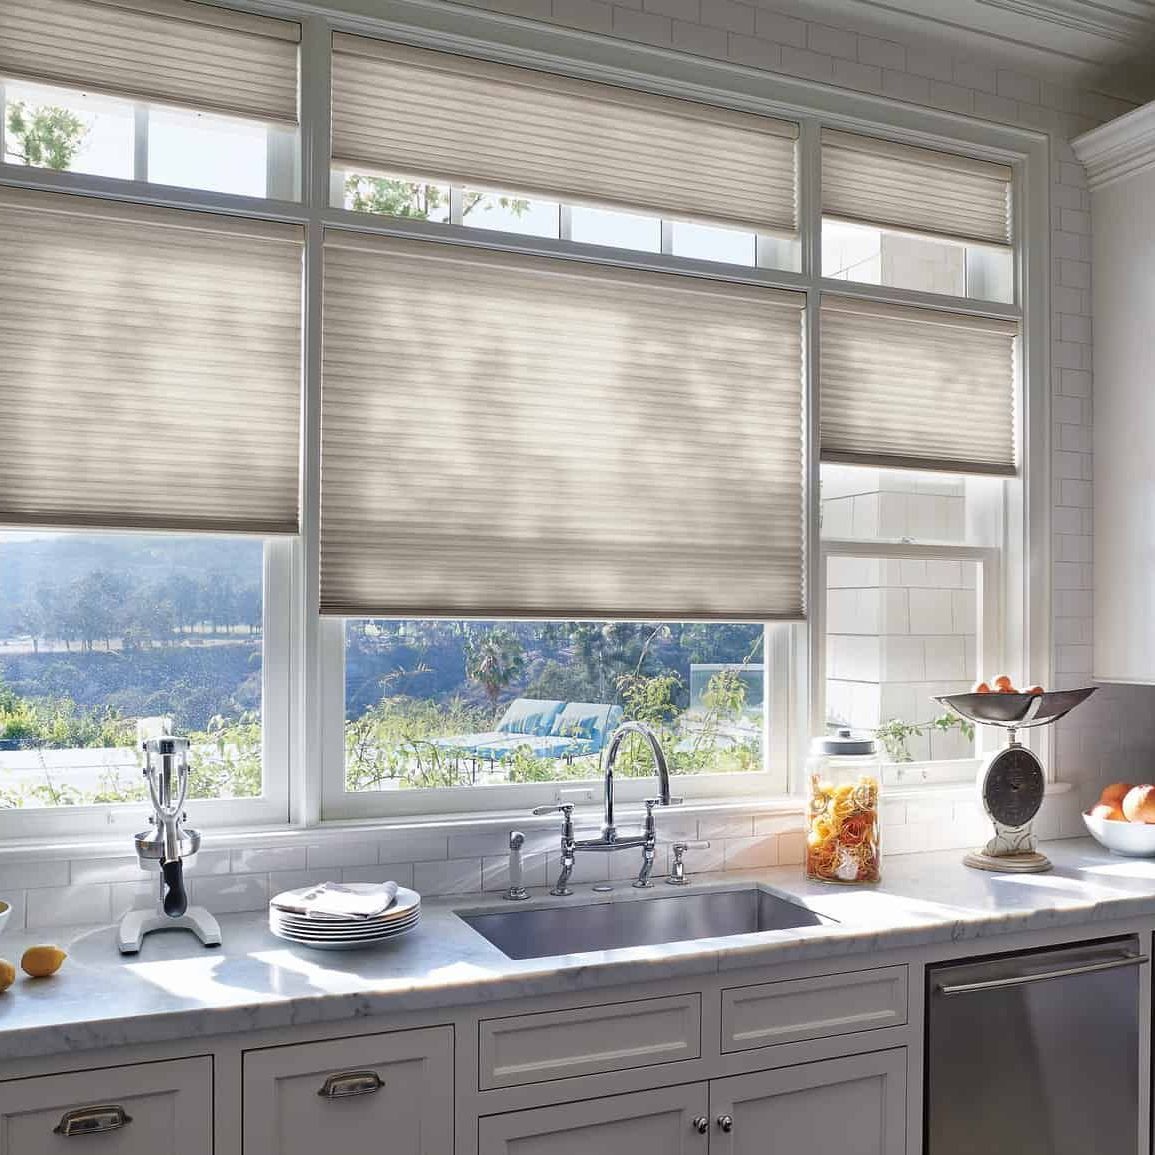 Hunter Douglas Duette® Cellular Shades in a kitchen